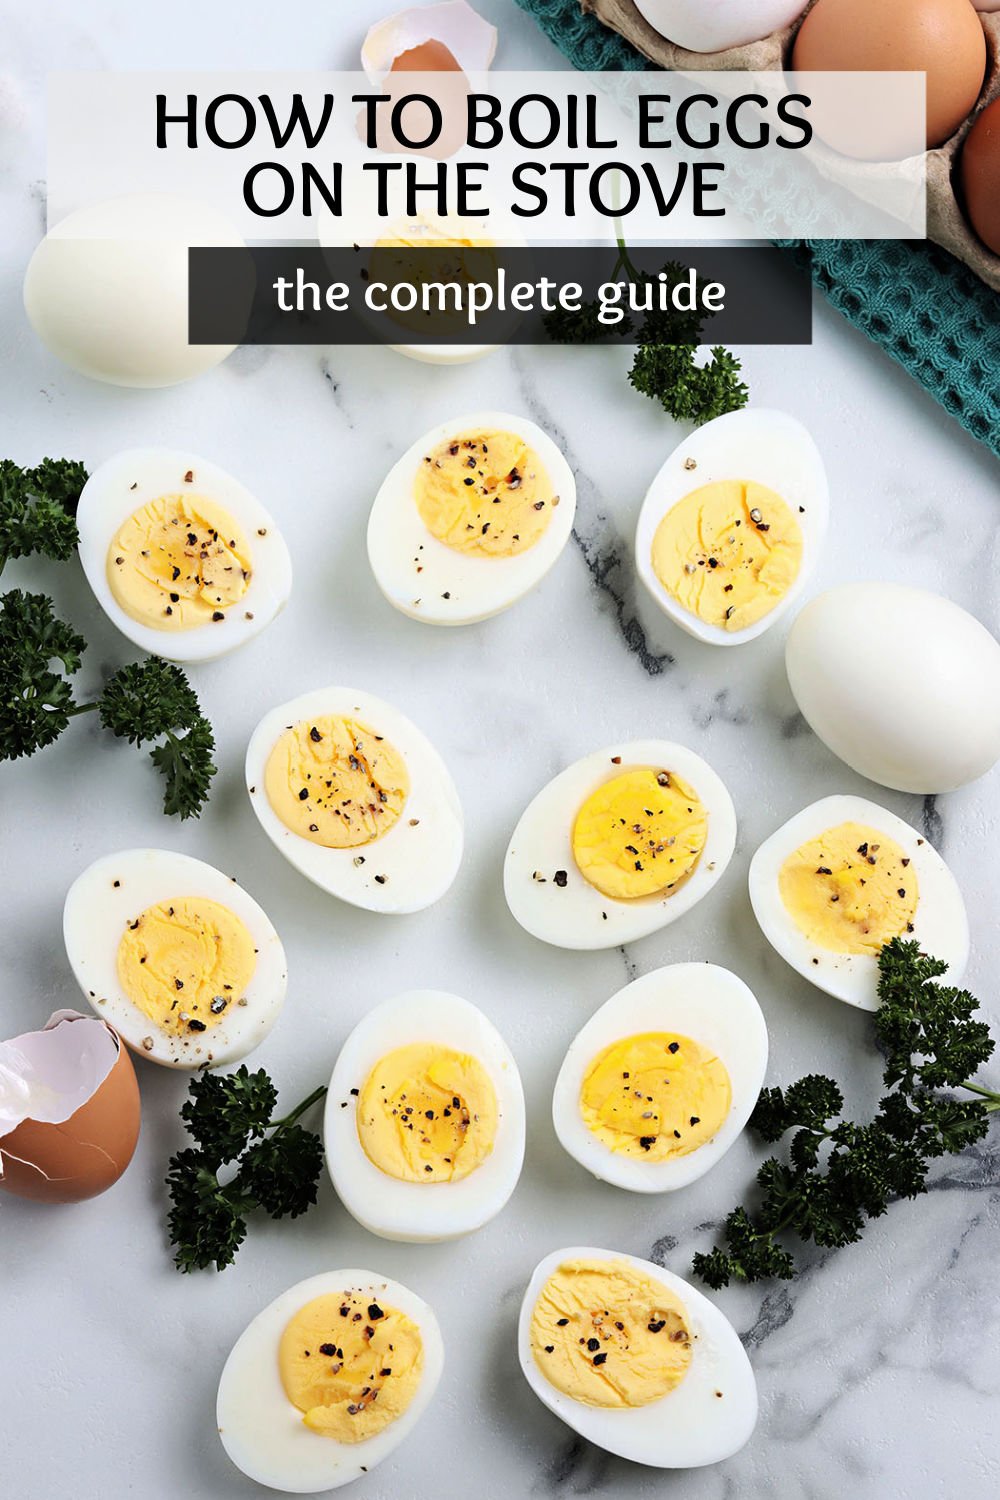 If you've ever struggled with making a hard boiled egg on your stovetop and thought to yourself, "there must be a better way," you're in luck! This comprehensive guide will show you how to make perfect hard boiled eggs on your stovetop, every time! | www.persnicketyplates.com